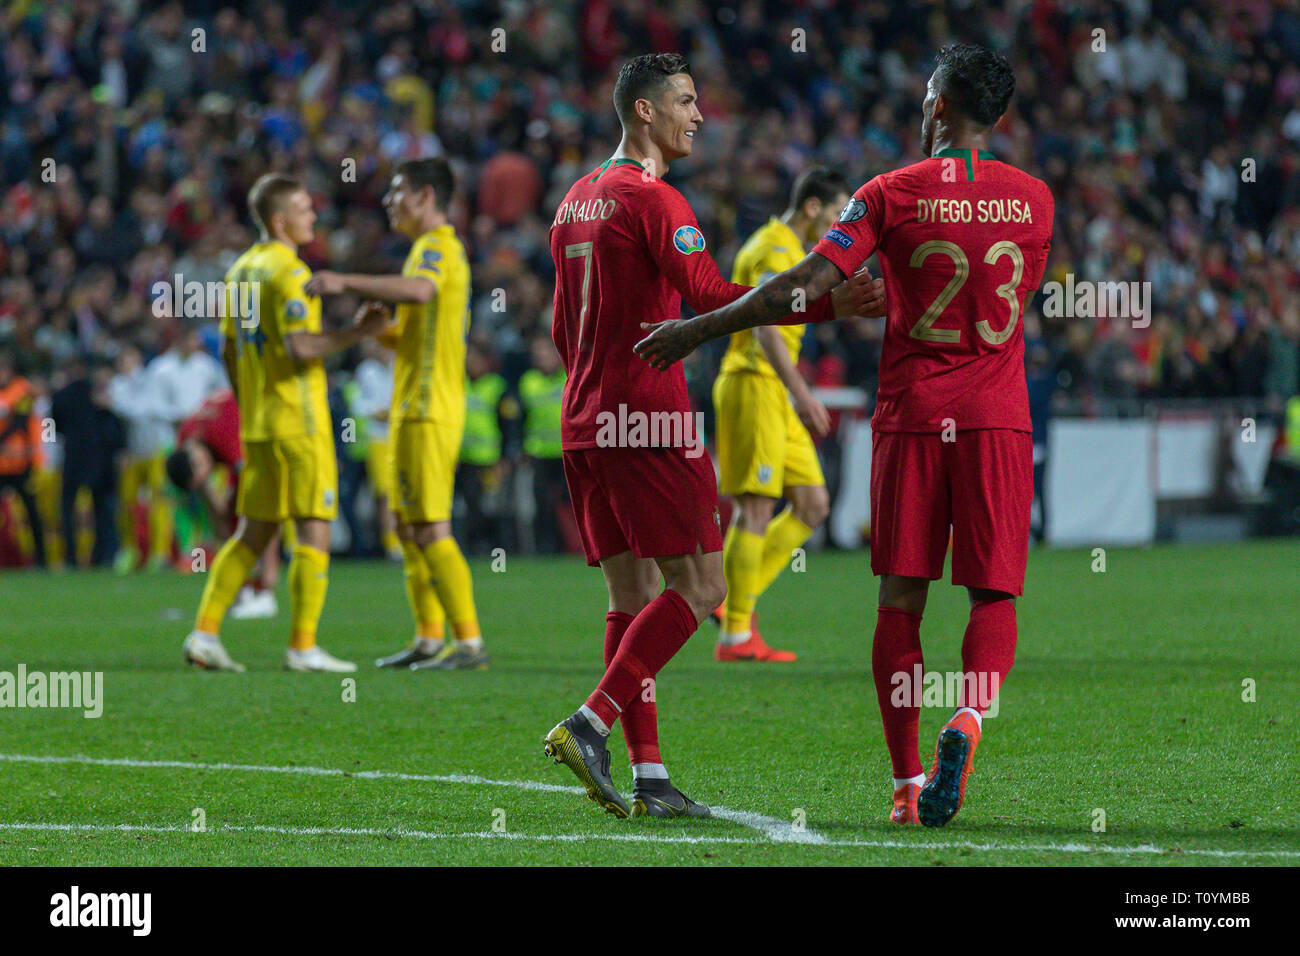 Lisbon, Portugal. 22nd Mar, 2019. March 22, 2019. Lisbon, Portugal. Portugal's and Juventus forward Cristiano Ronaldo (7) and Portugal's and Braga forward Dyego Sousa (23) during the European Championship 2020 Qualifying Round between Portugal and Ukraine Credit: Alexandre de Sousa/Alamy Live News Stock Photo